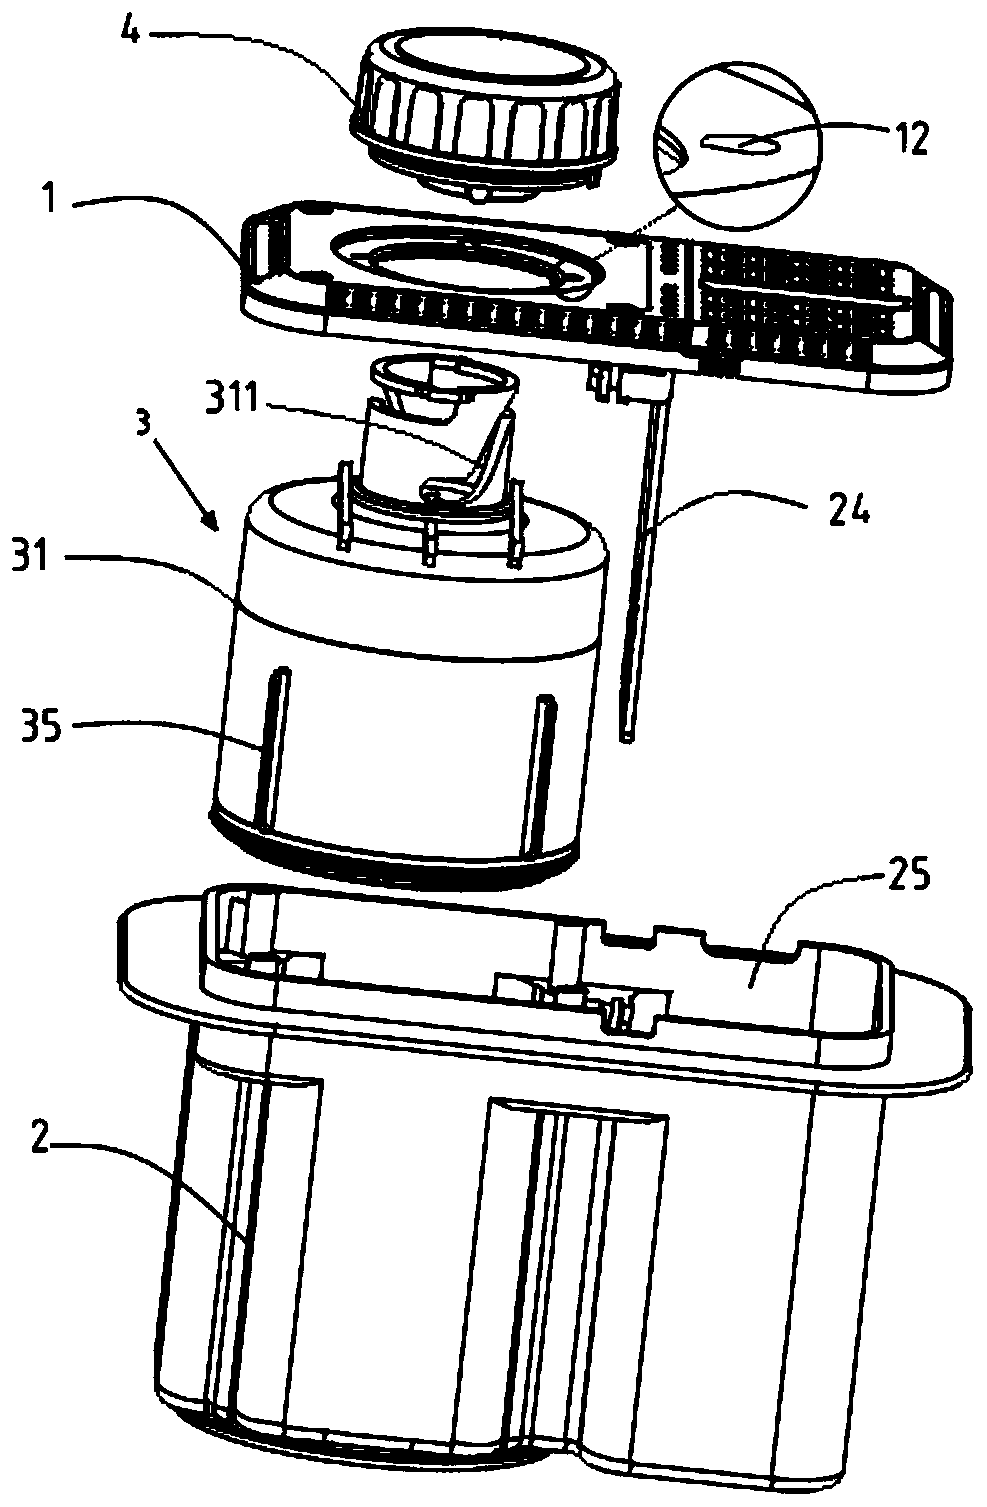 Built-in electric air pump capable of being used for air inflation and exhausting